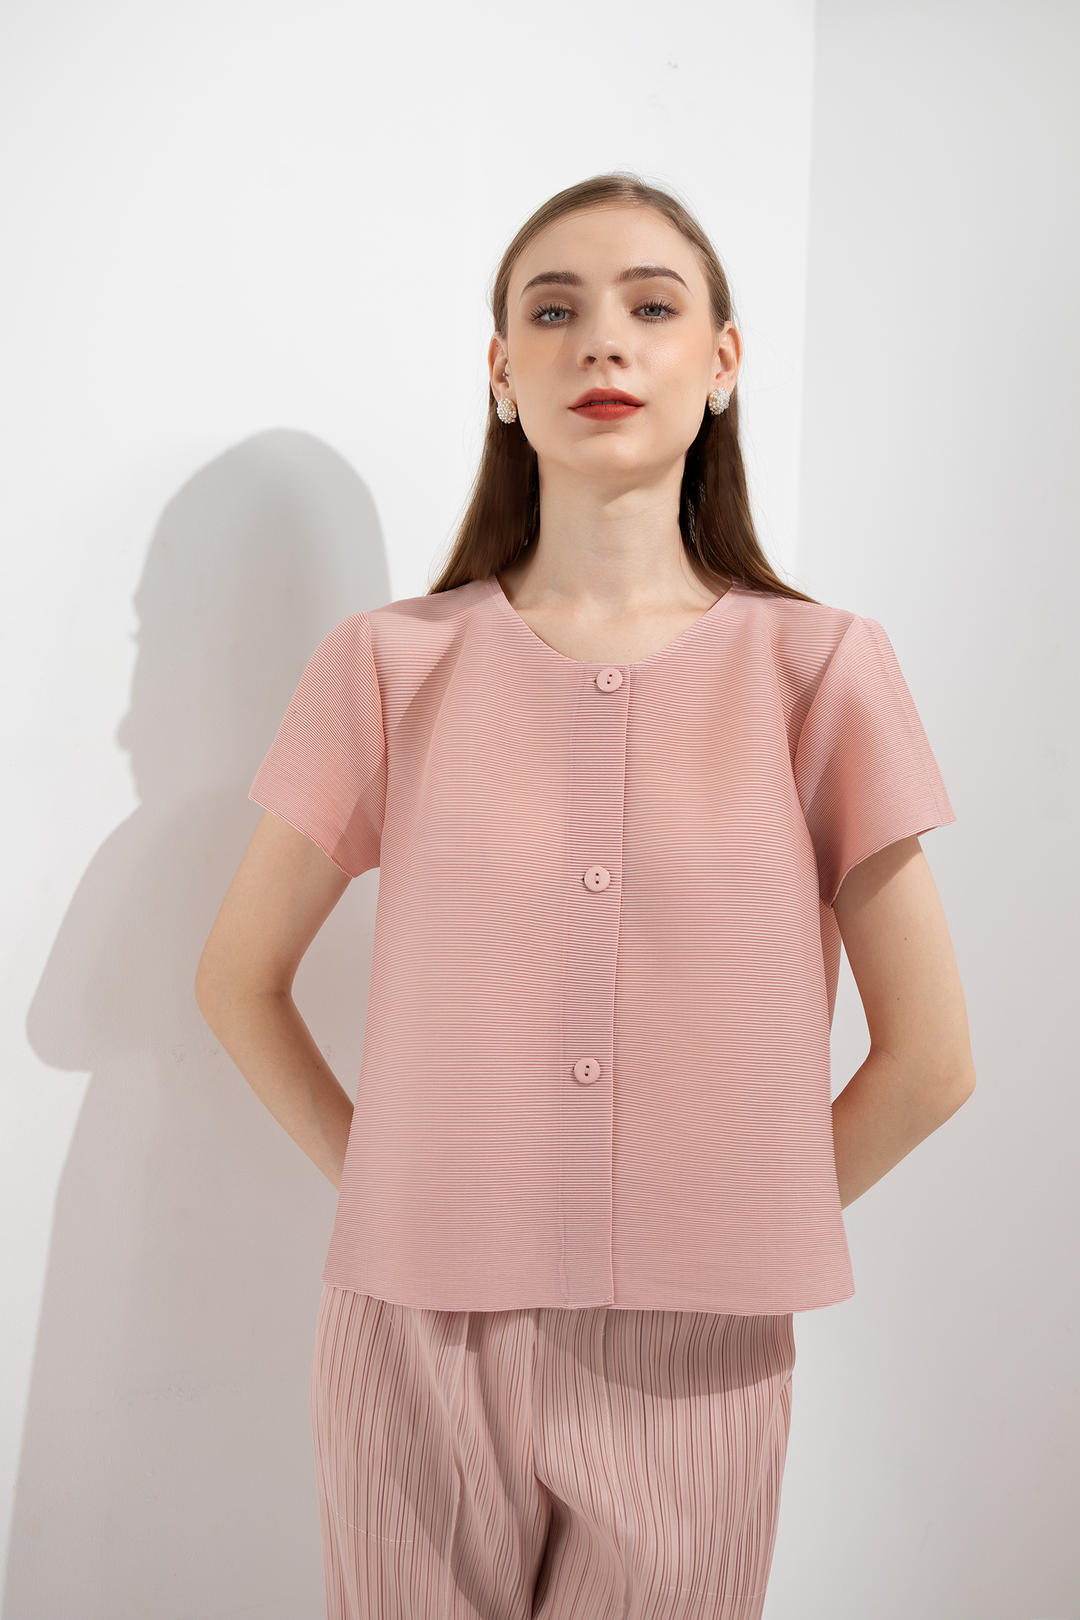 AIME'E Pleated Top - Pink